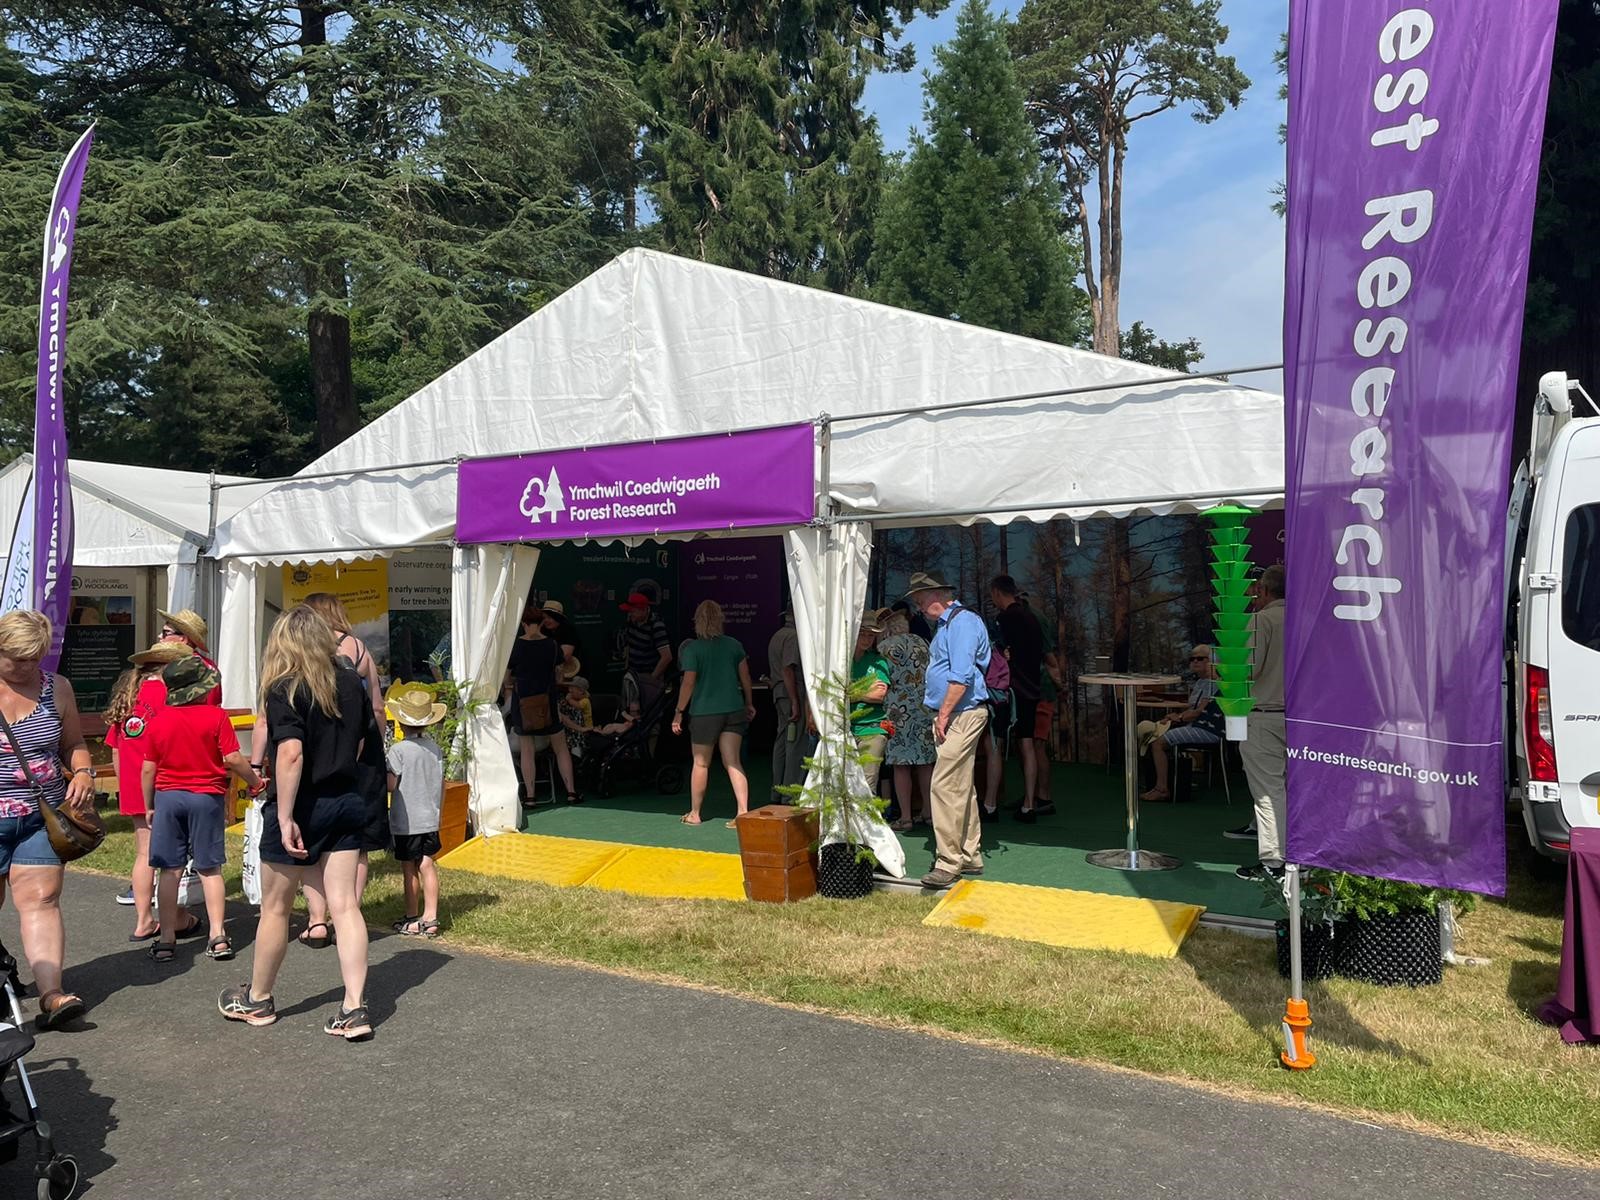 The Forest Research tent at an event in summer